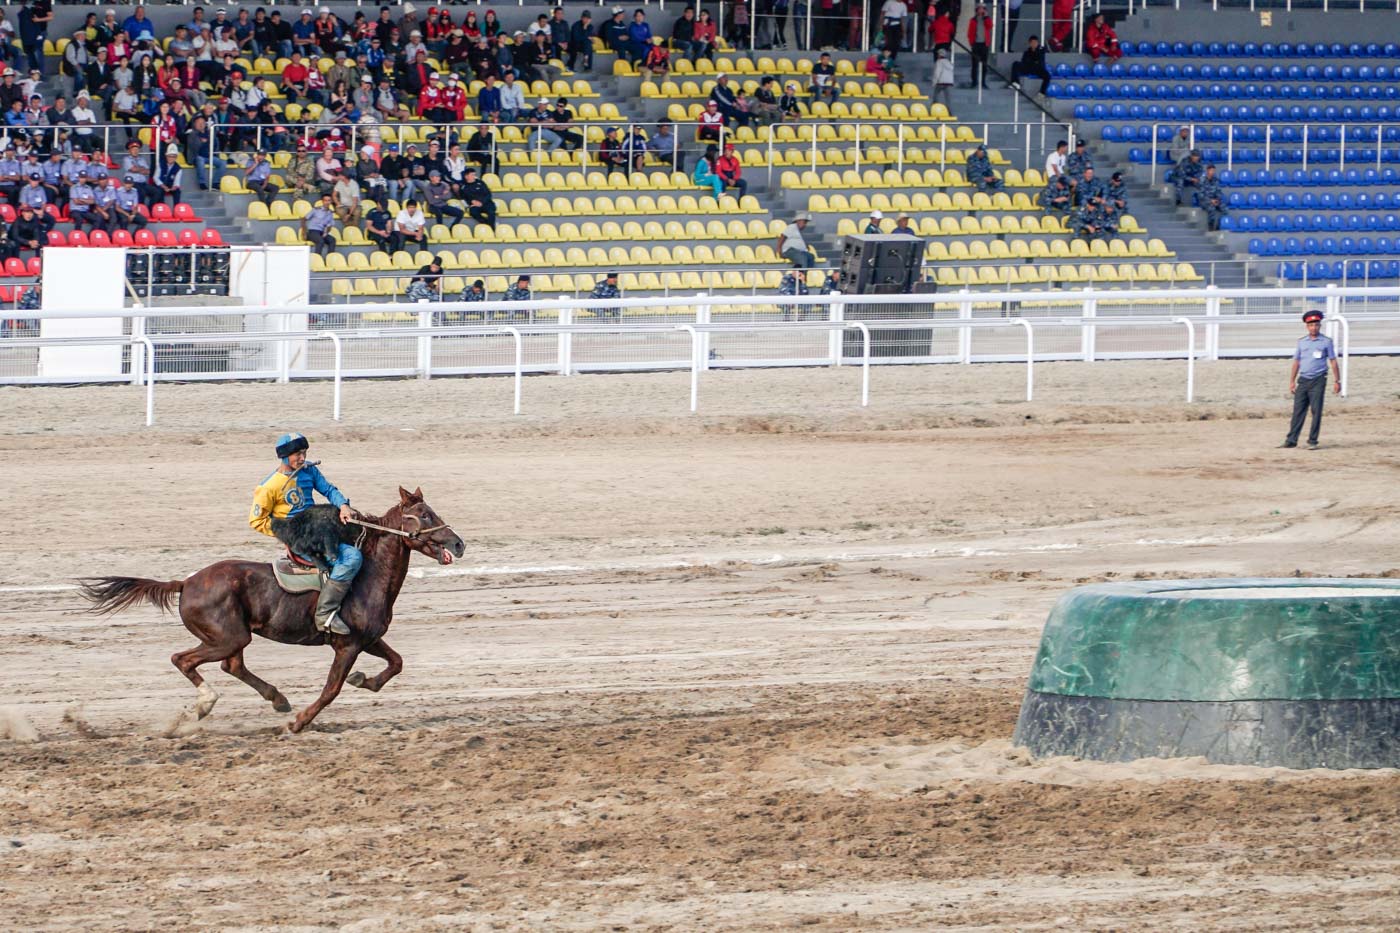 Man on horse about to throw the dead goat into the ring playing Dead Goat Polo known as Kok Buru at the World Nomad Games